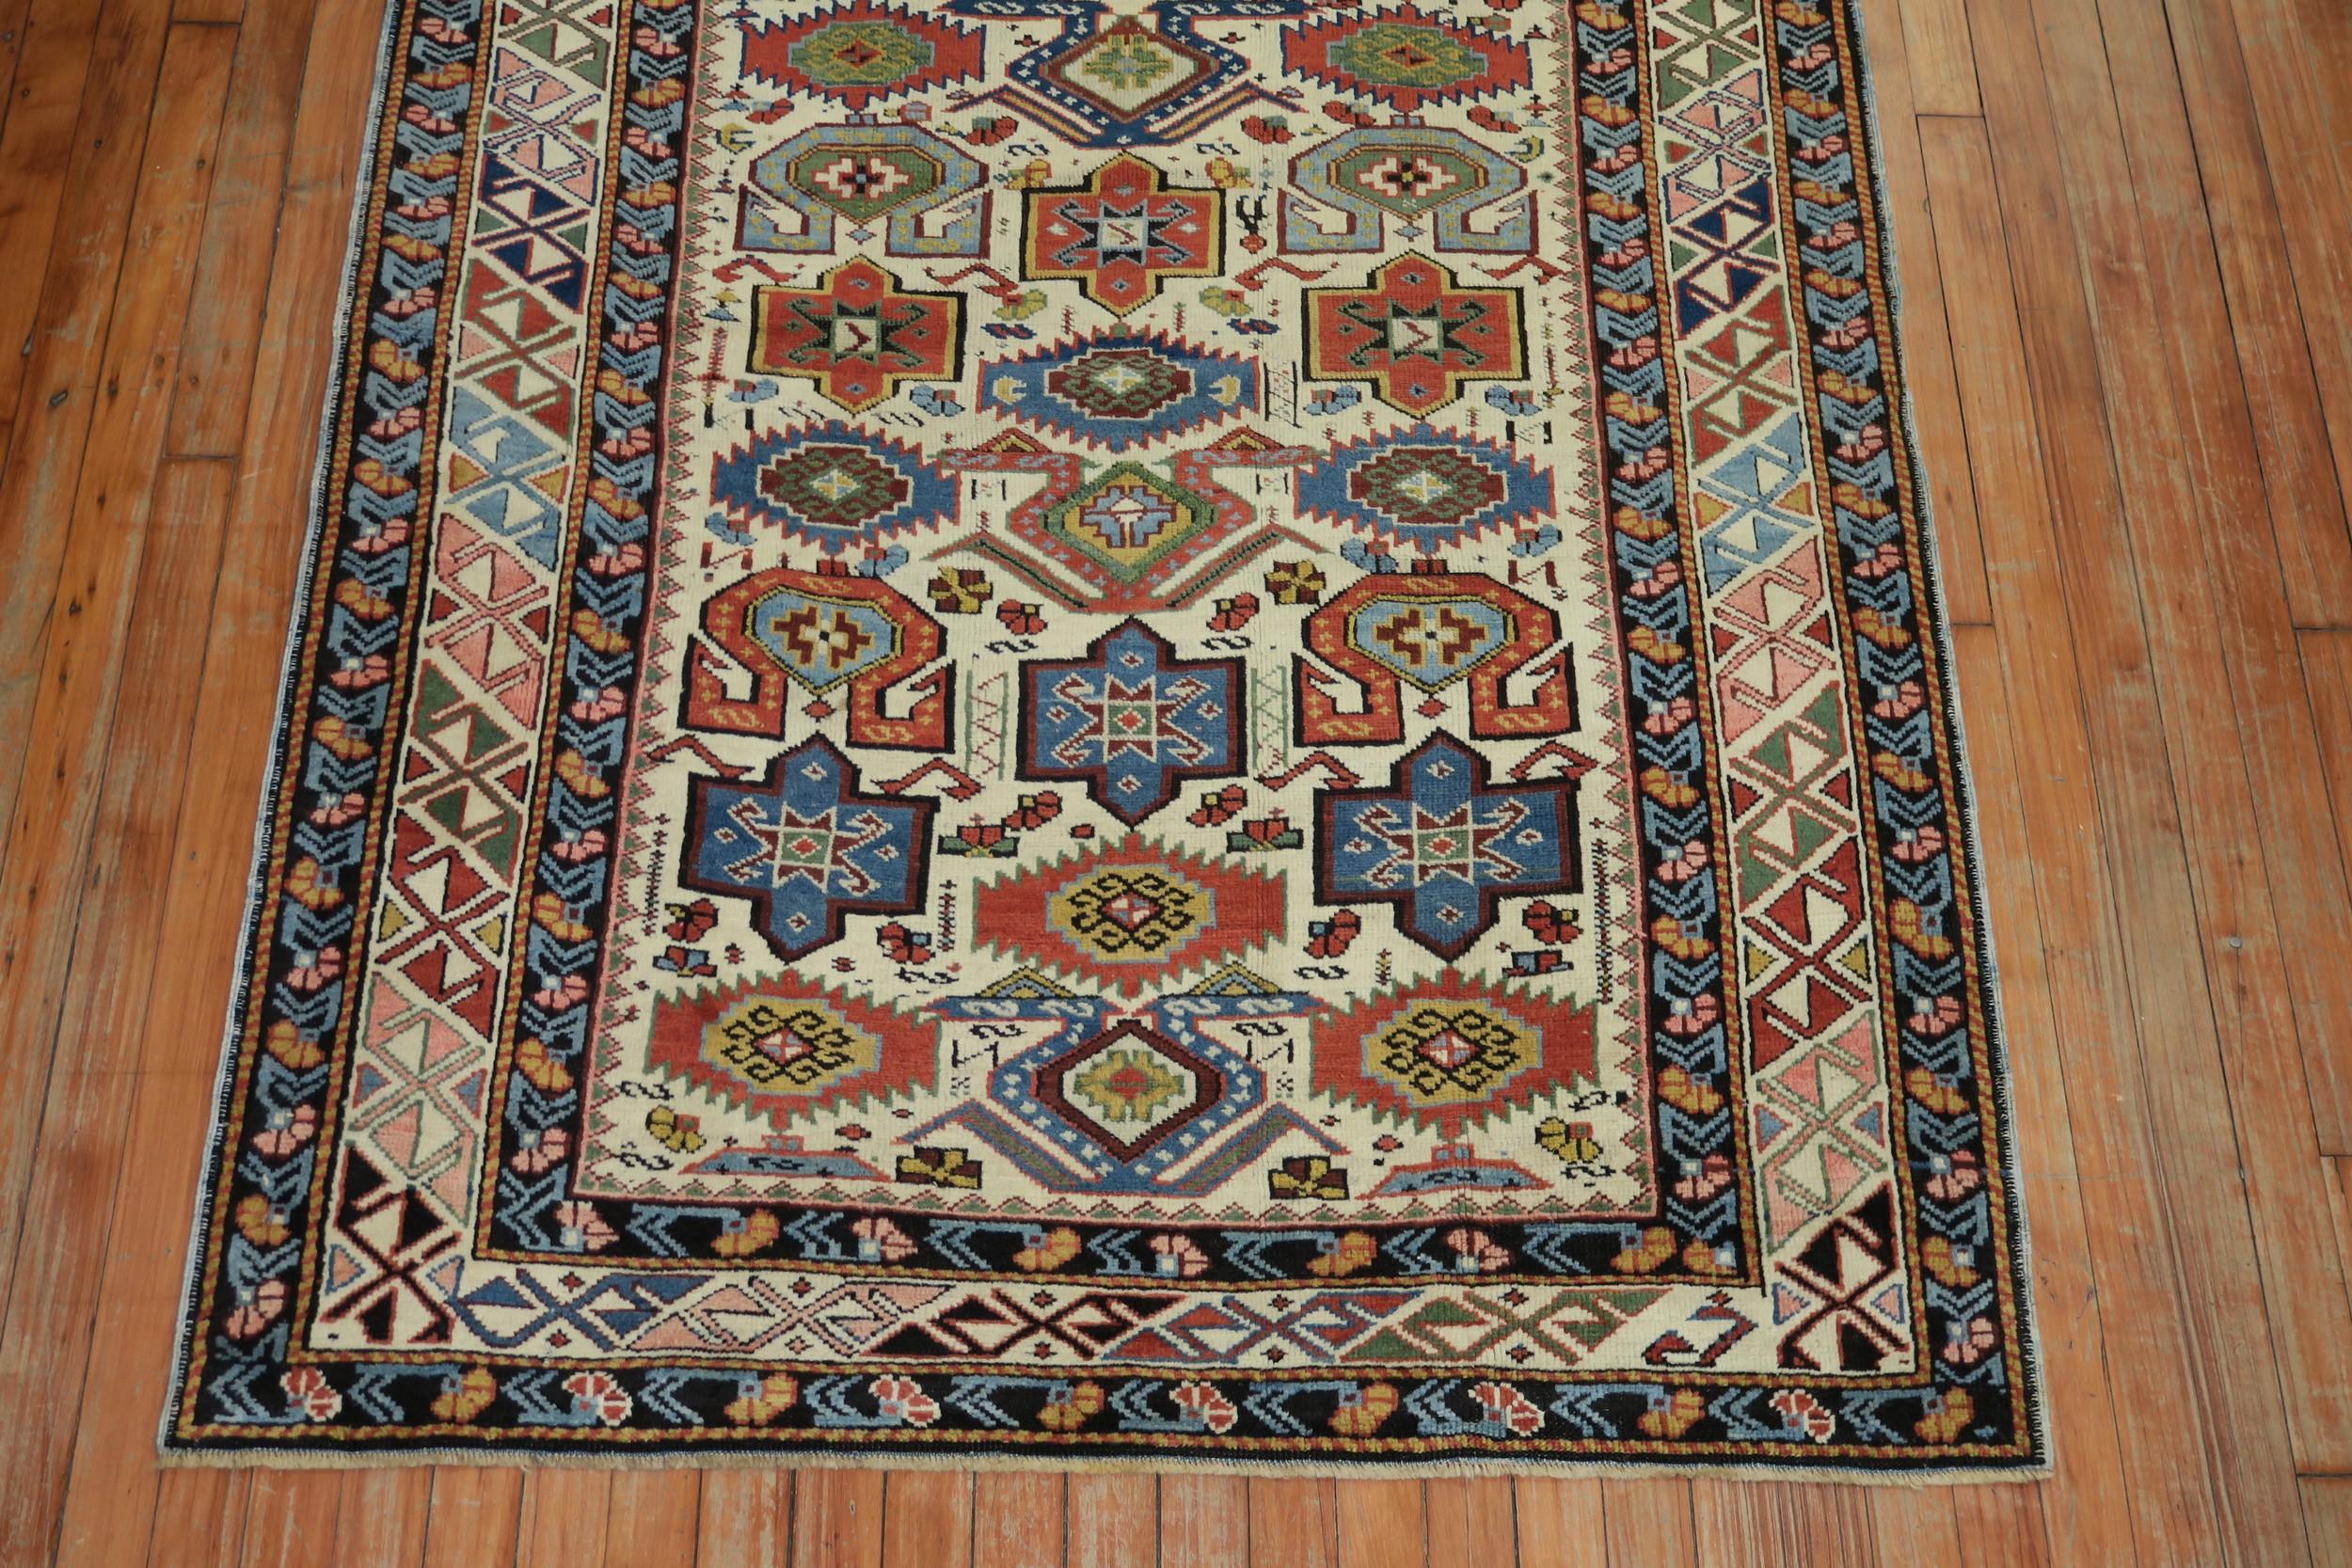 An early 20th century ivory field Caucasian Kuba rug.
This captivating Seichur Kuba presents motifs that trace a direct line to the most archetypal and inspired early Caucasian weavings. Offered on an aged rare ivory ground, the rug's border